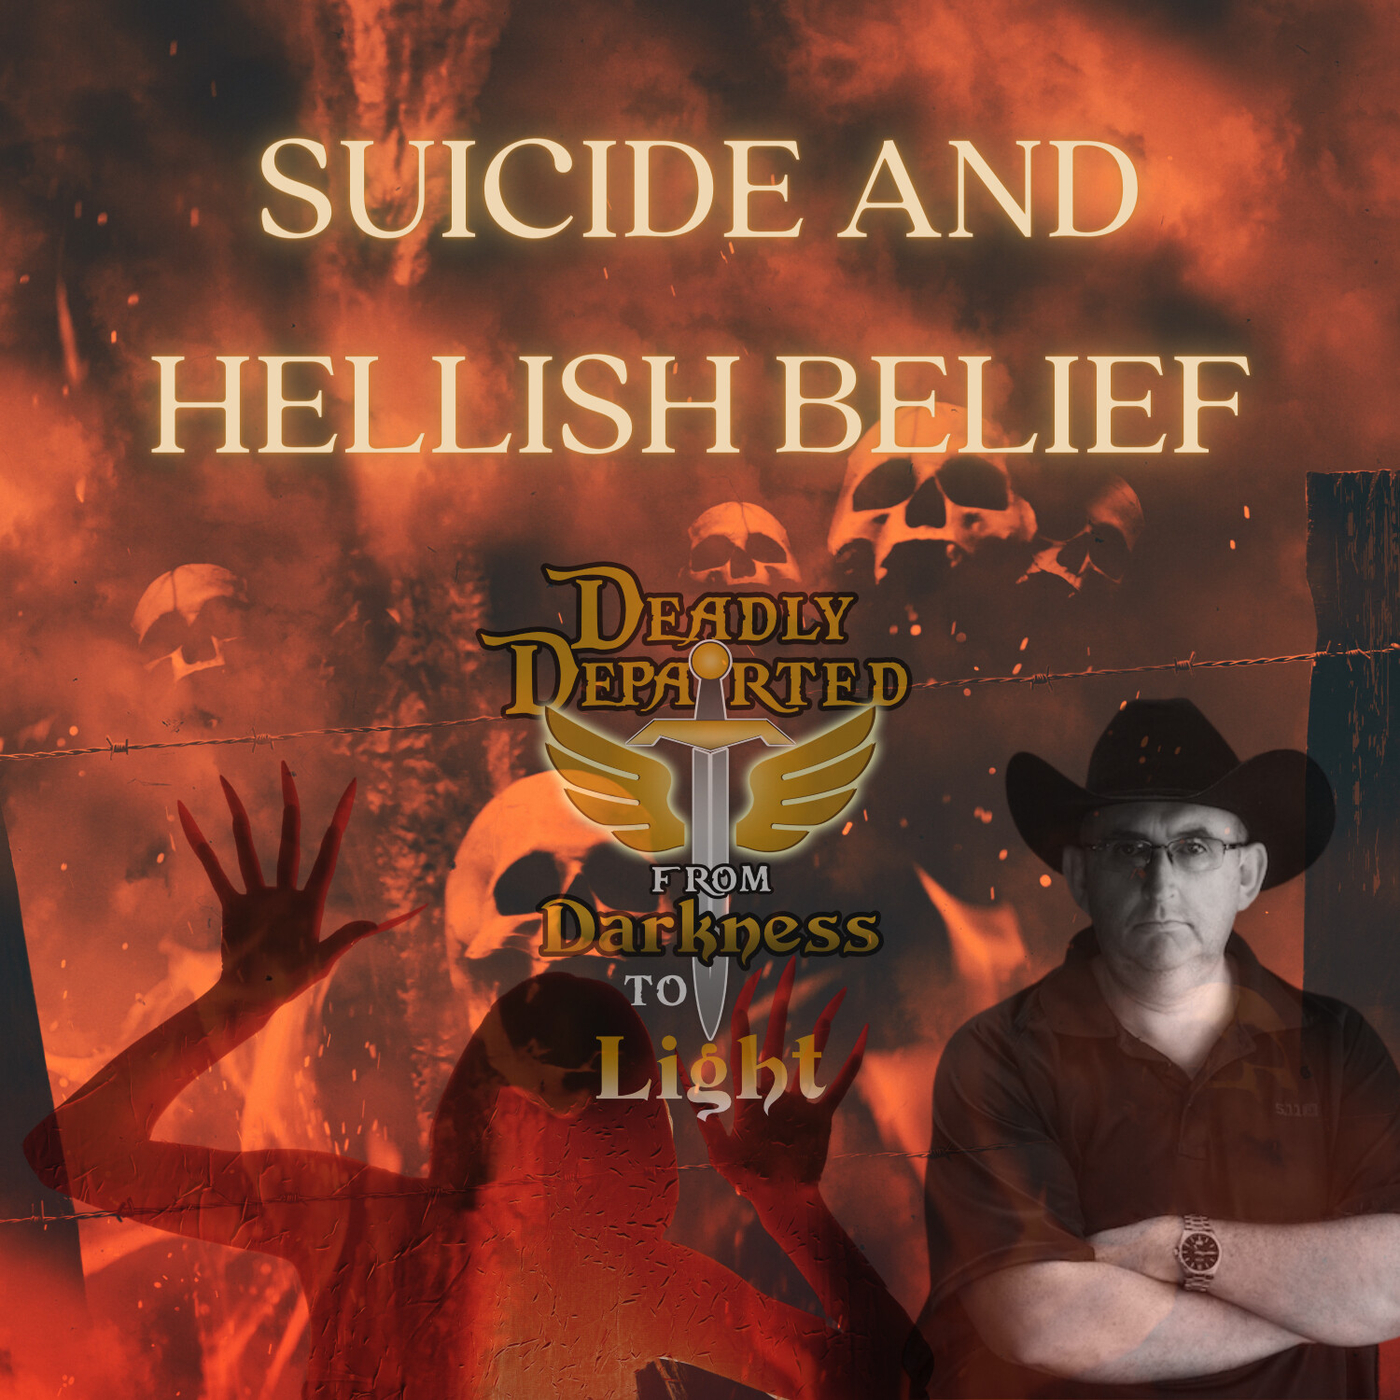 Suicide and The Fires Of Hellish Belief